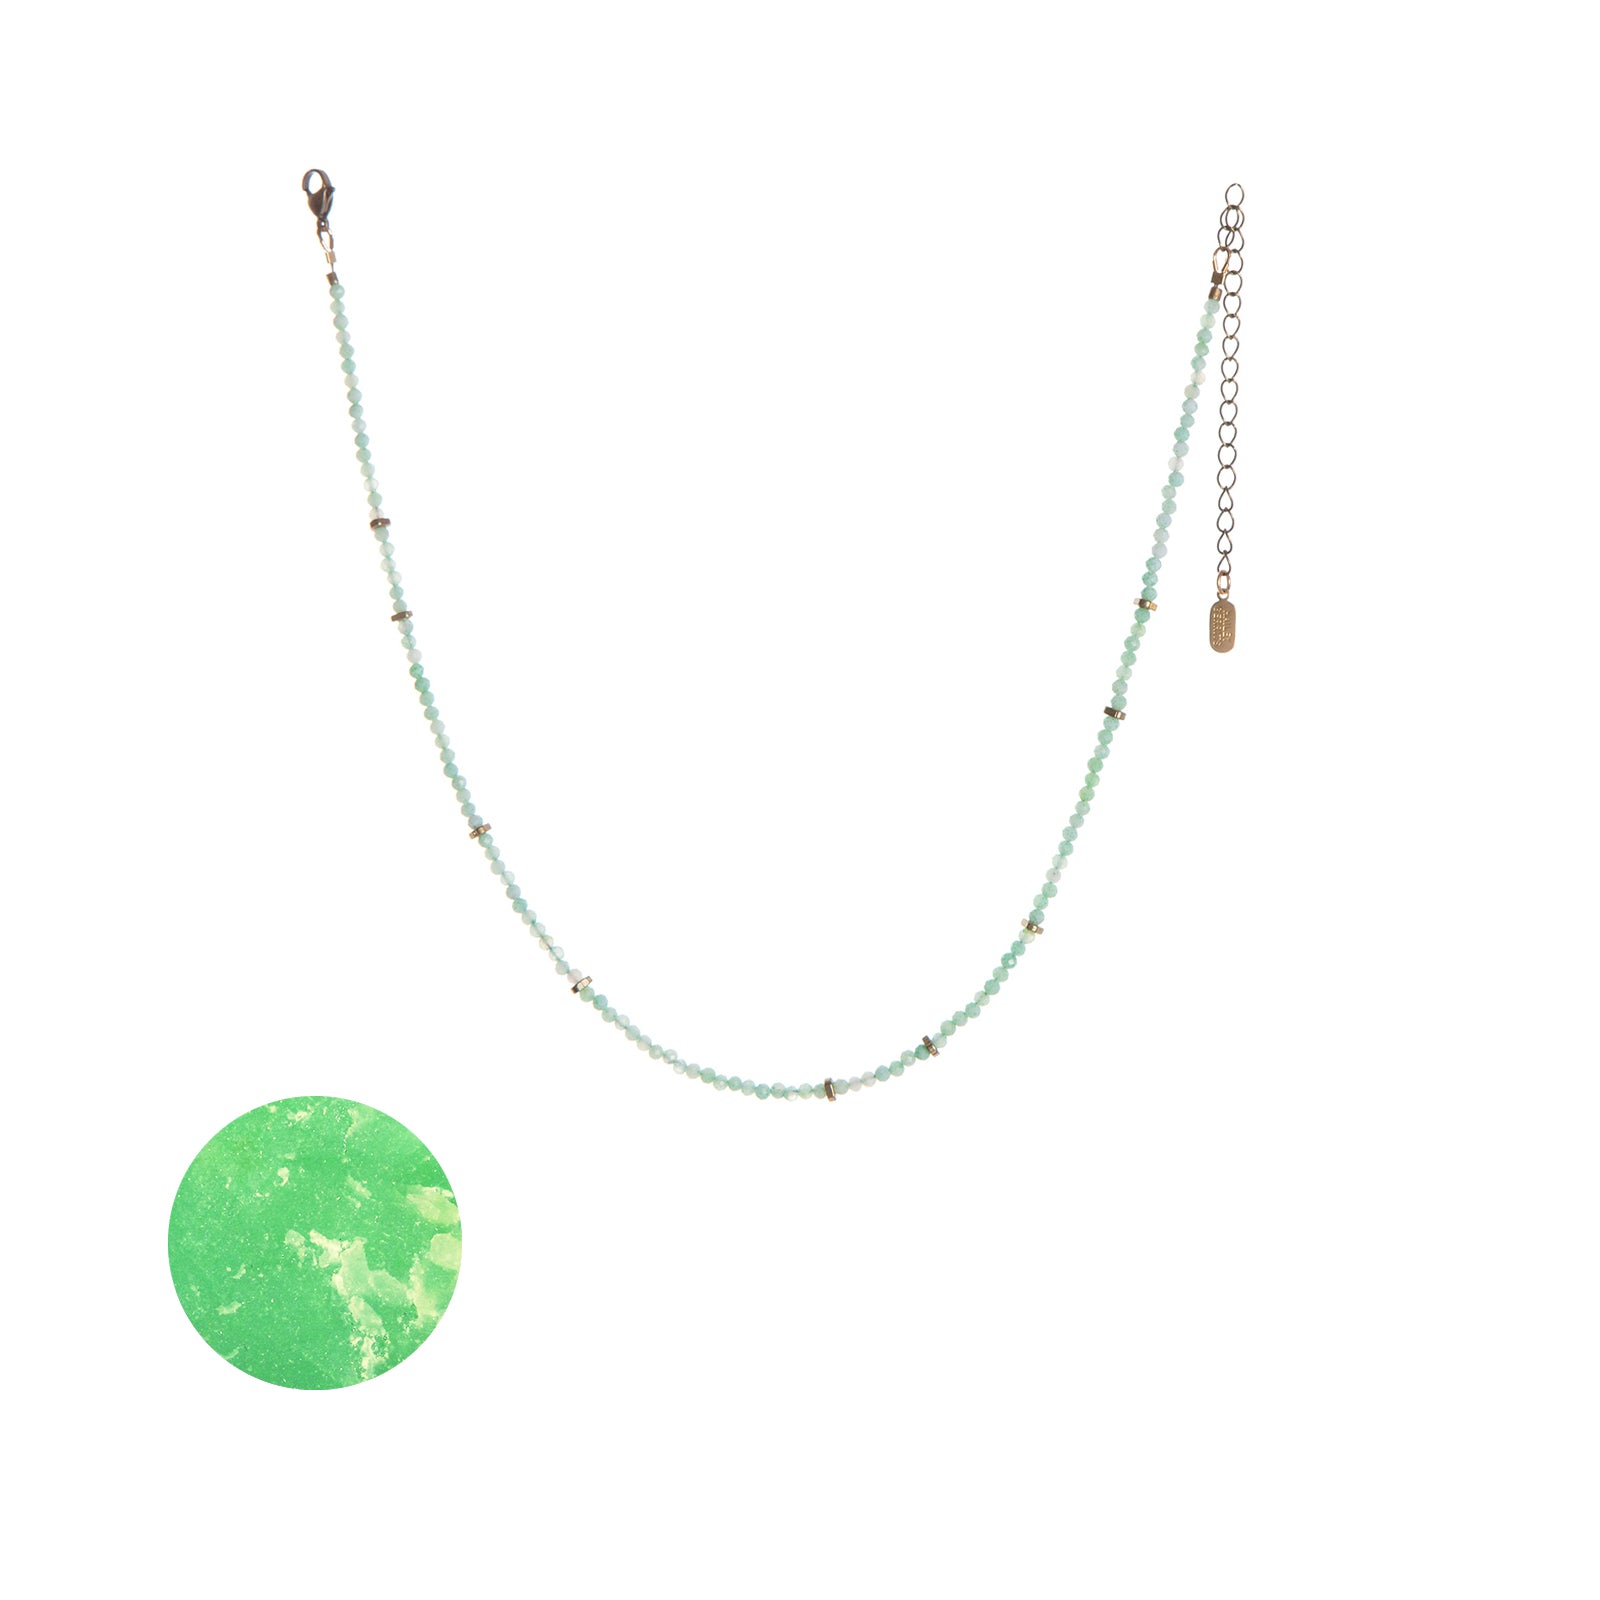 Hailey Gerrits - Oso Necklace